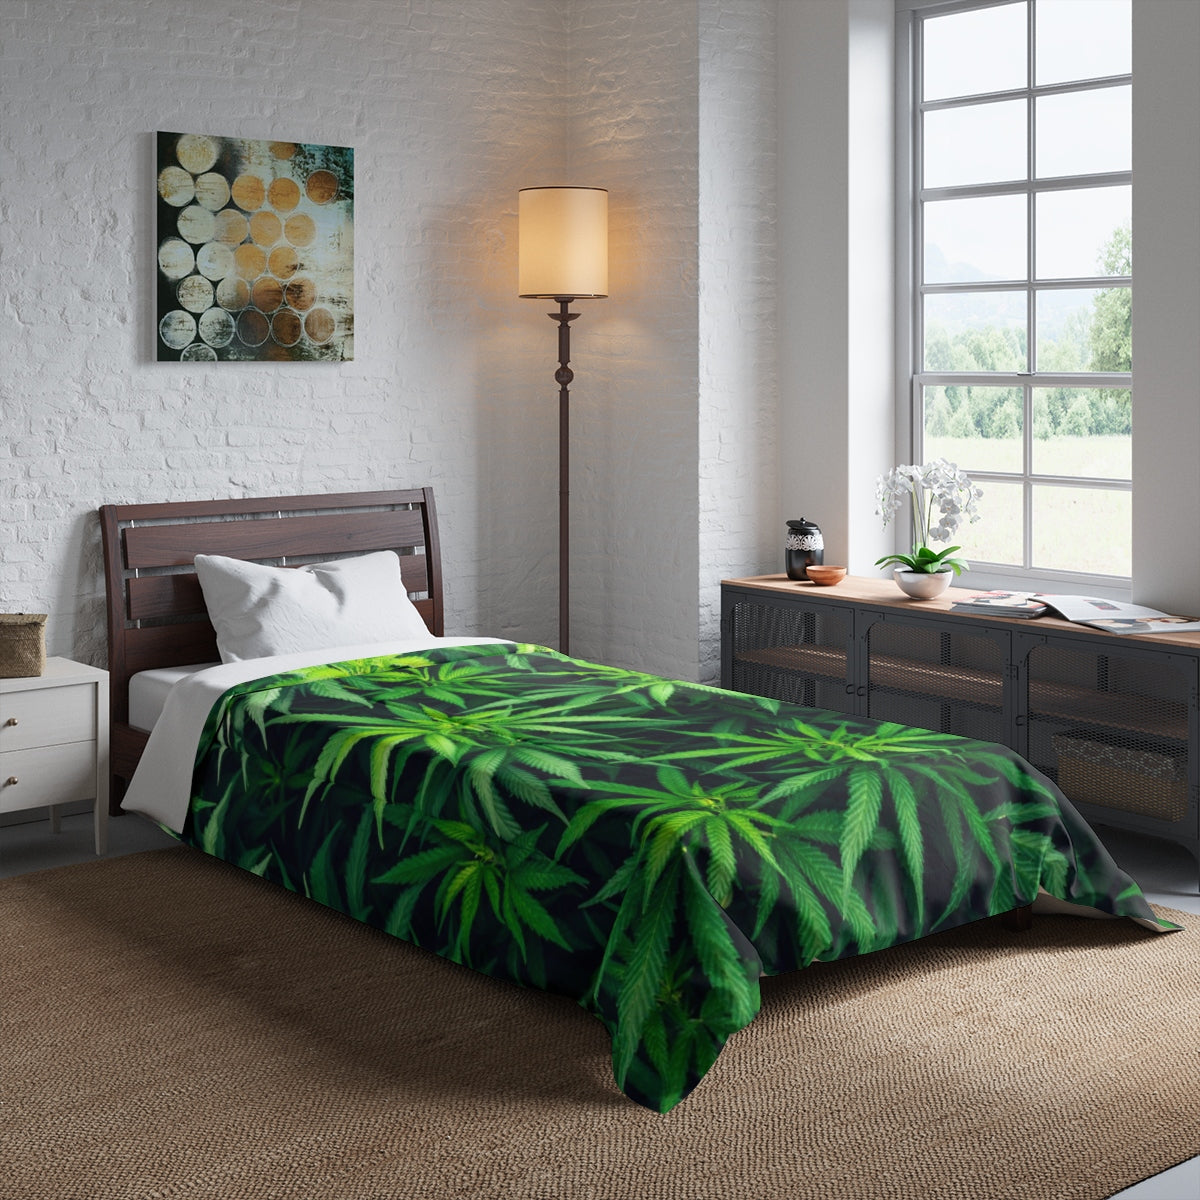 My Cannabis Custom Designed Comforter.  A Unique Cannabis Gift For Friends & Family. Cannabis Decor For Your Home. Cannabis Comforter